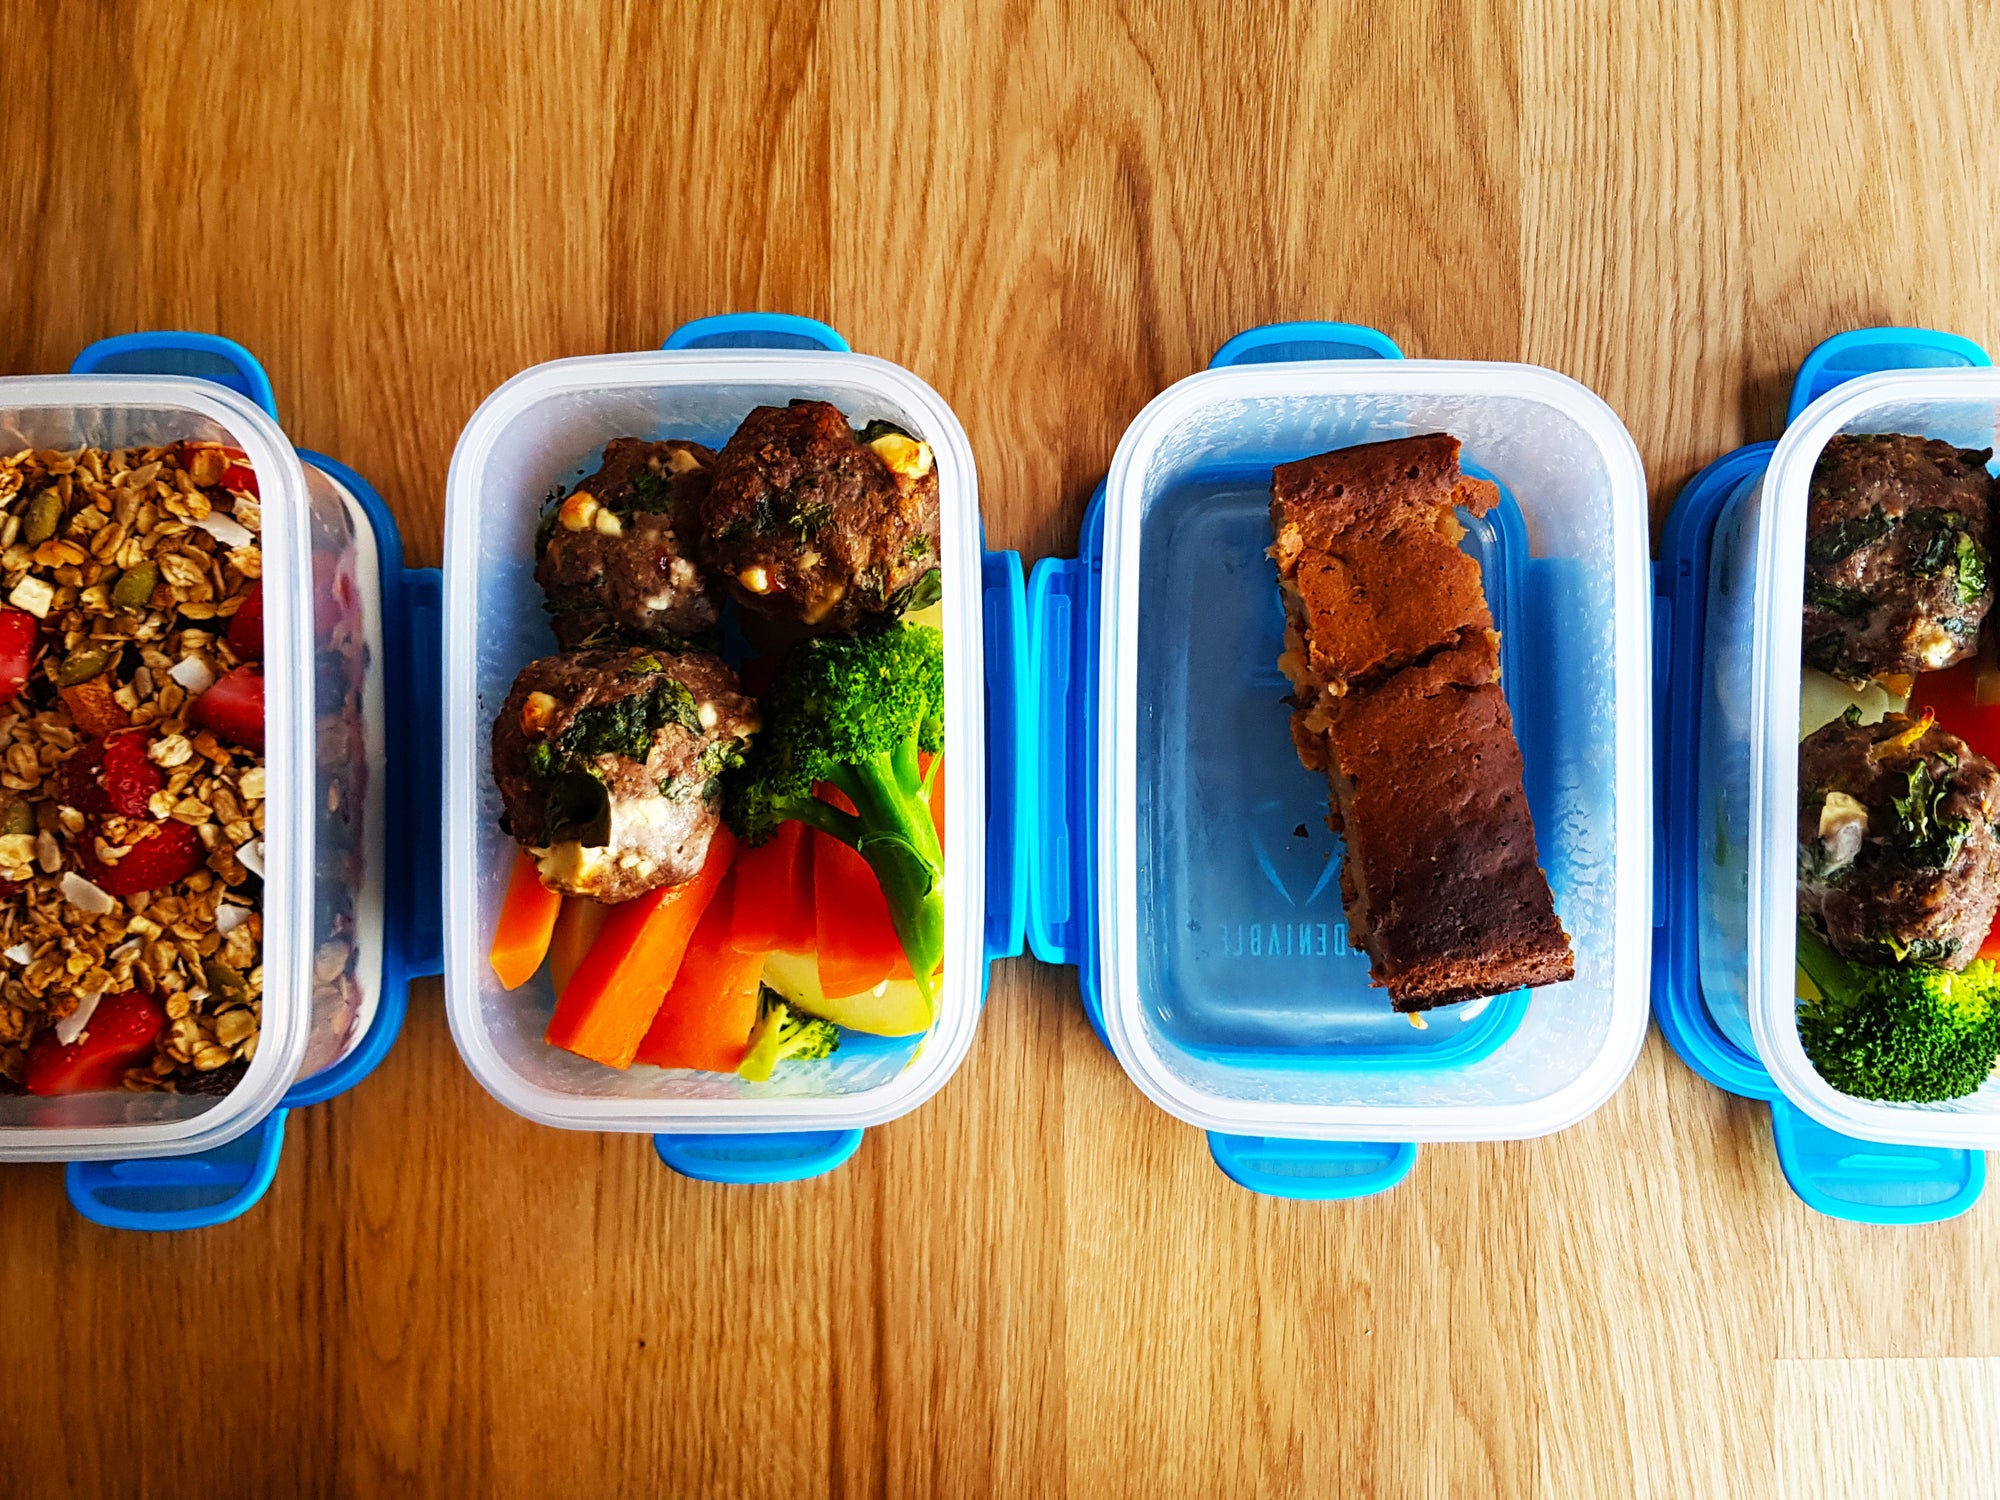 Meal Prep Sunday - 29th July 2018 - 2000 Calories & 6 Meals Per Day